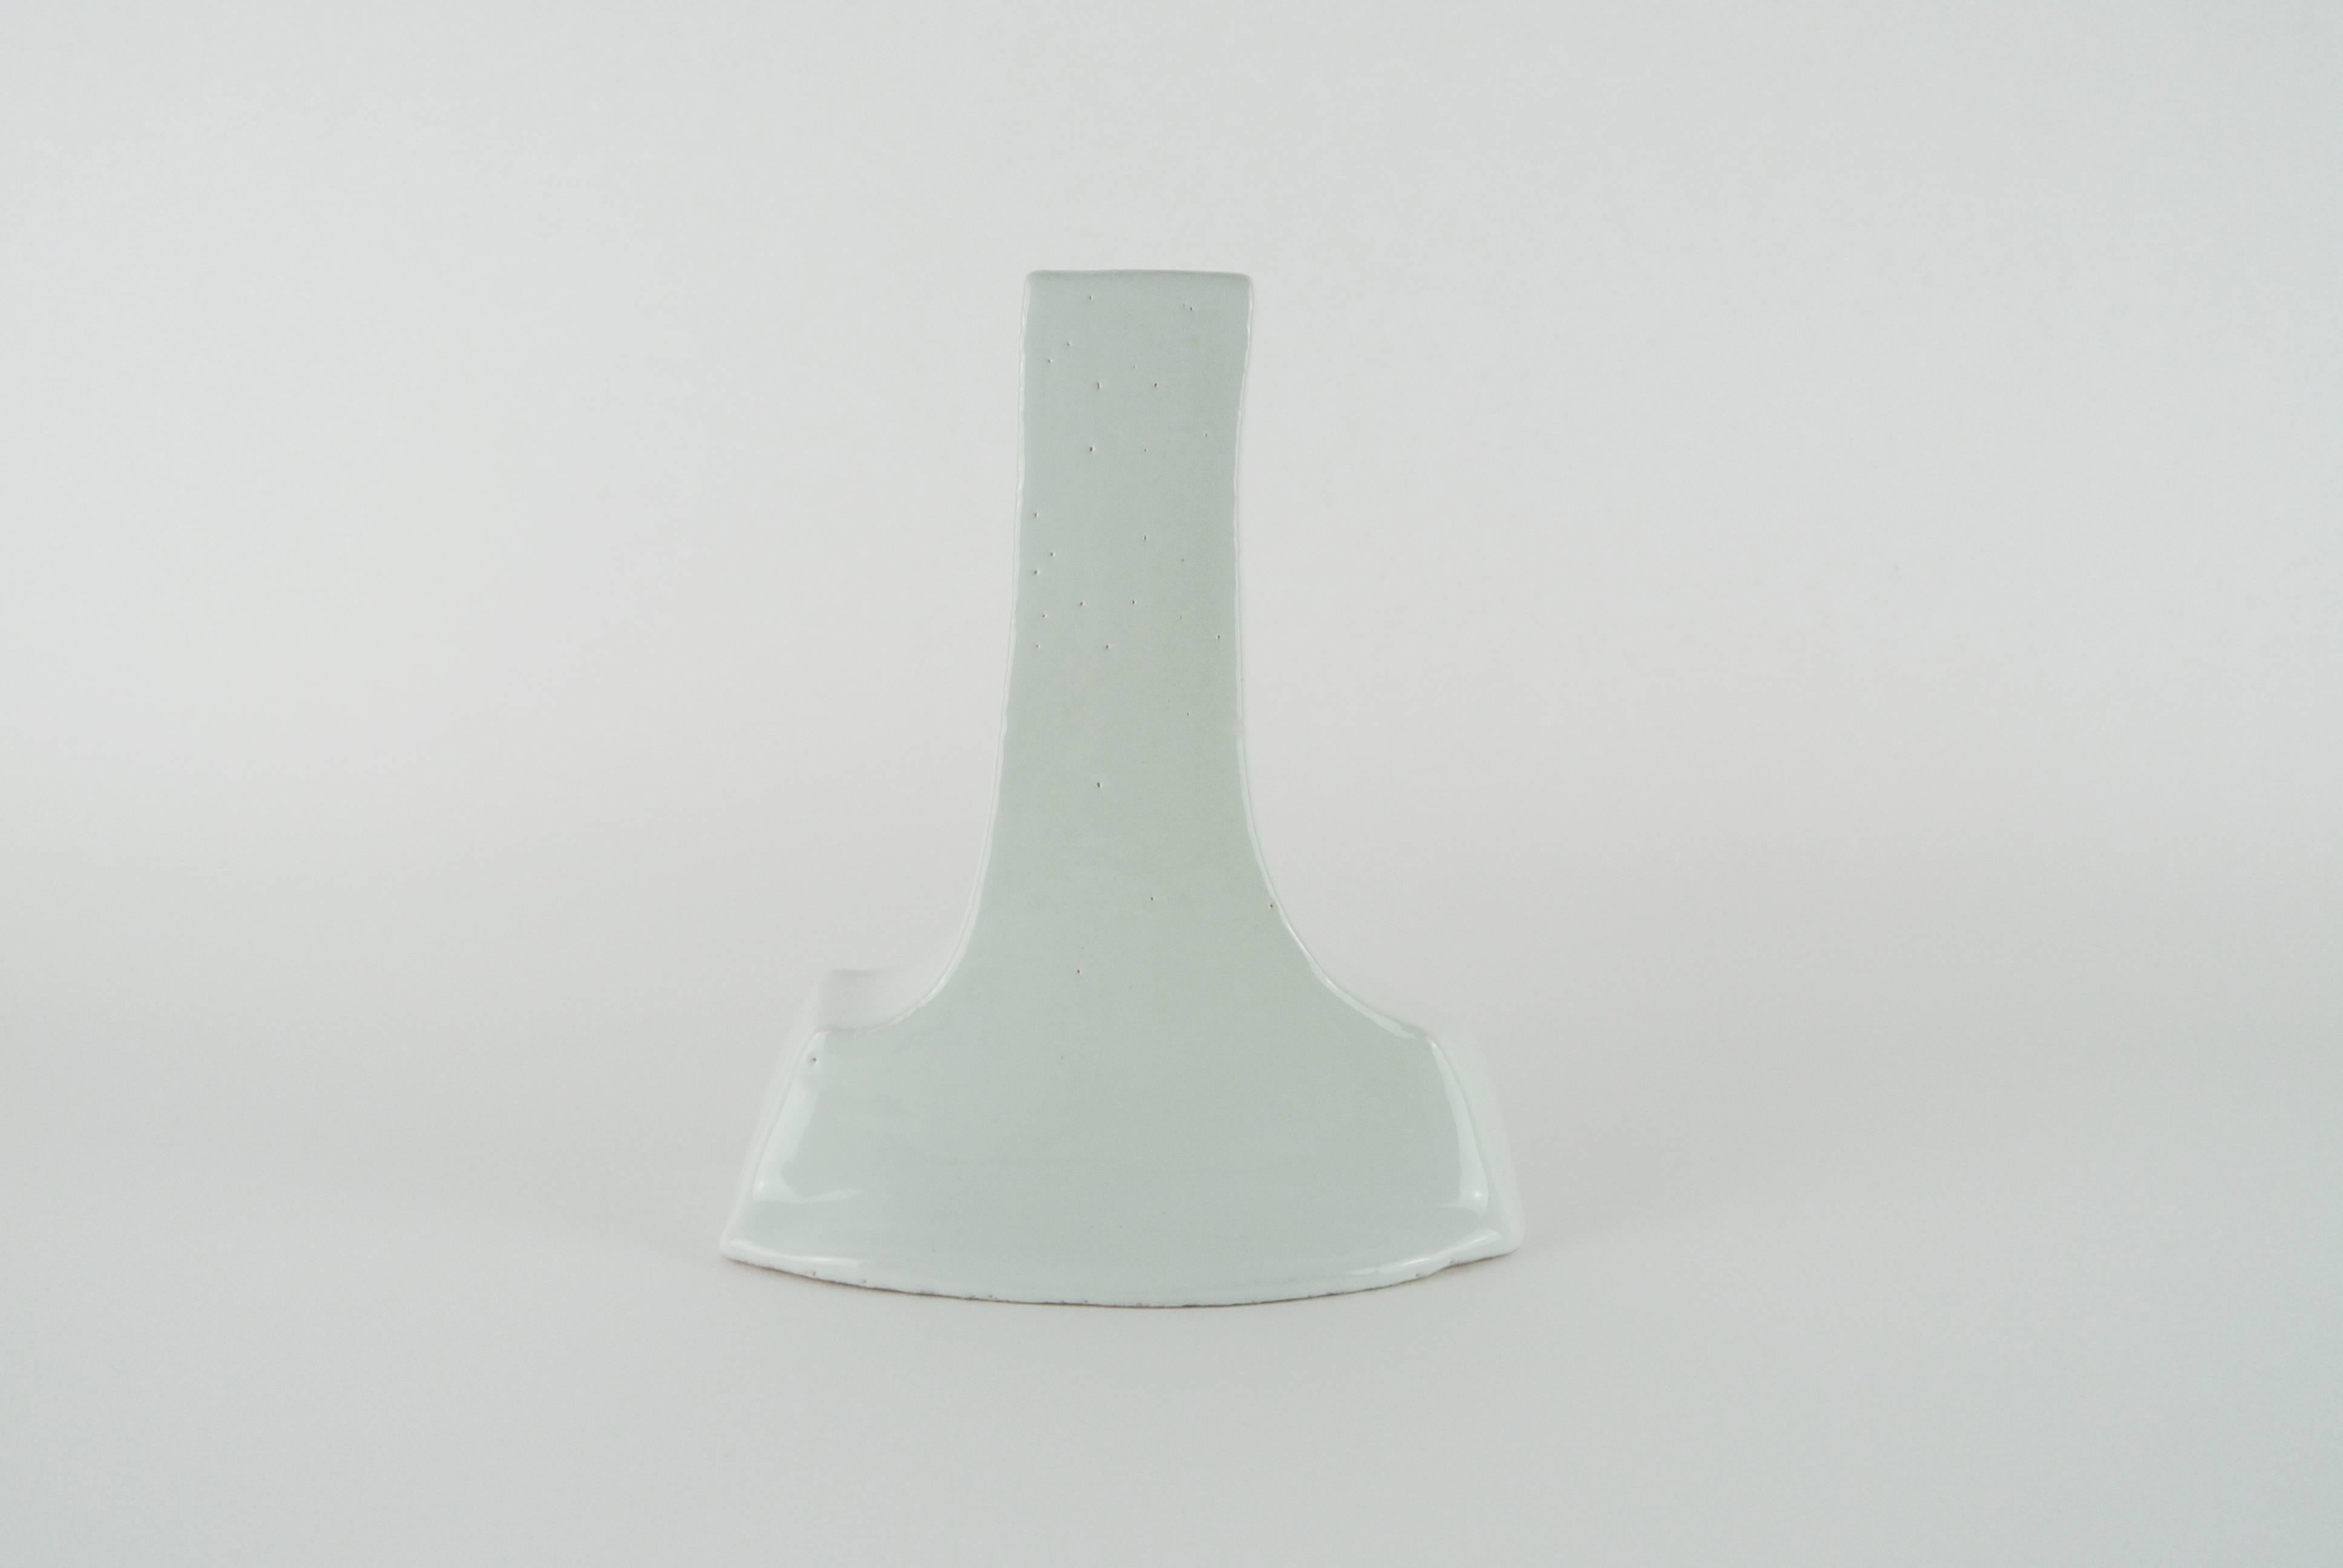 Hand build single light candle holder in white porcelain and white glossy glaze. Small sporadic spots visible on surface. Suitable for a 2.5 cm wide candle.
All pieces by Christine Roland celebrate the imperfections that occur from working with a